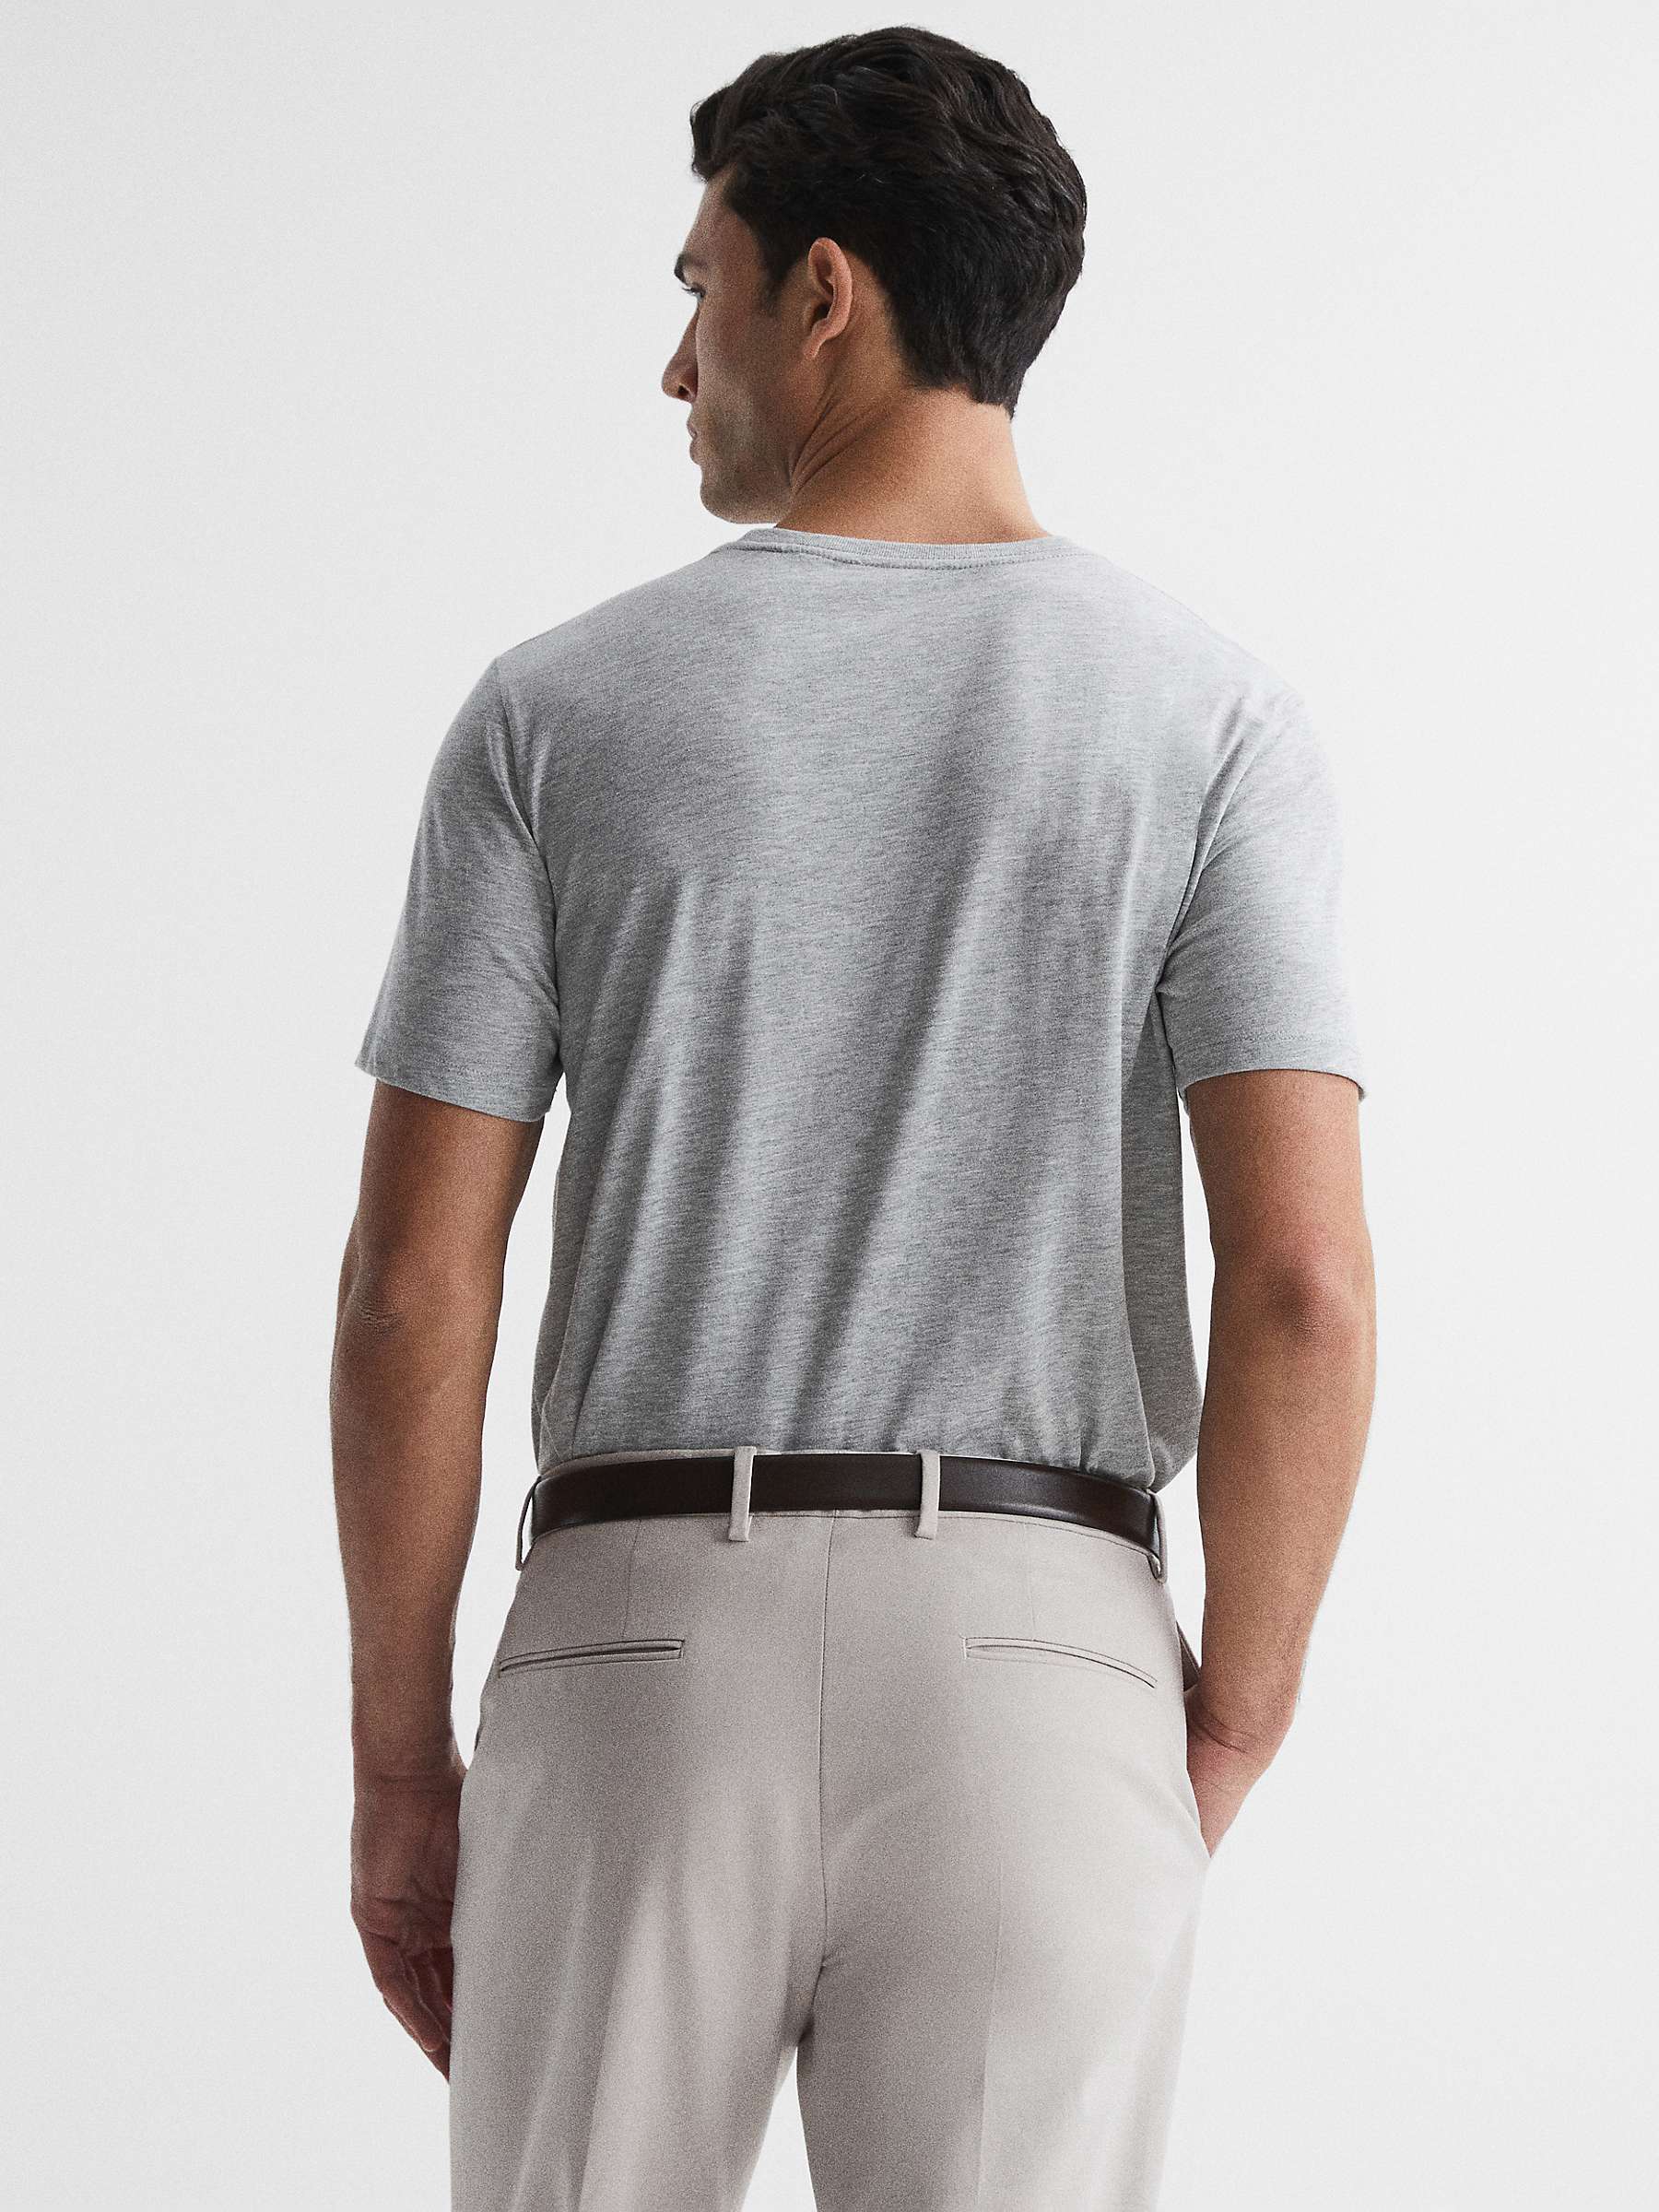 Buy Reiss Bless Crew Neck T-Shirt, Pack of 3 Online at johnlewis.com